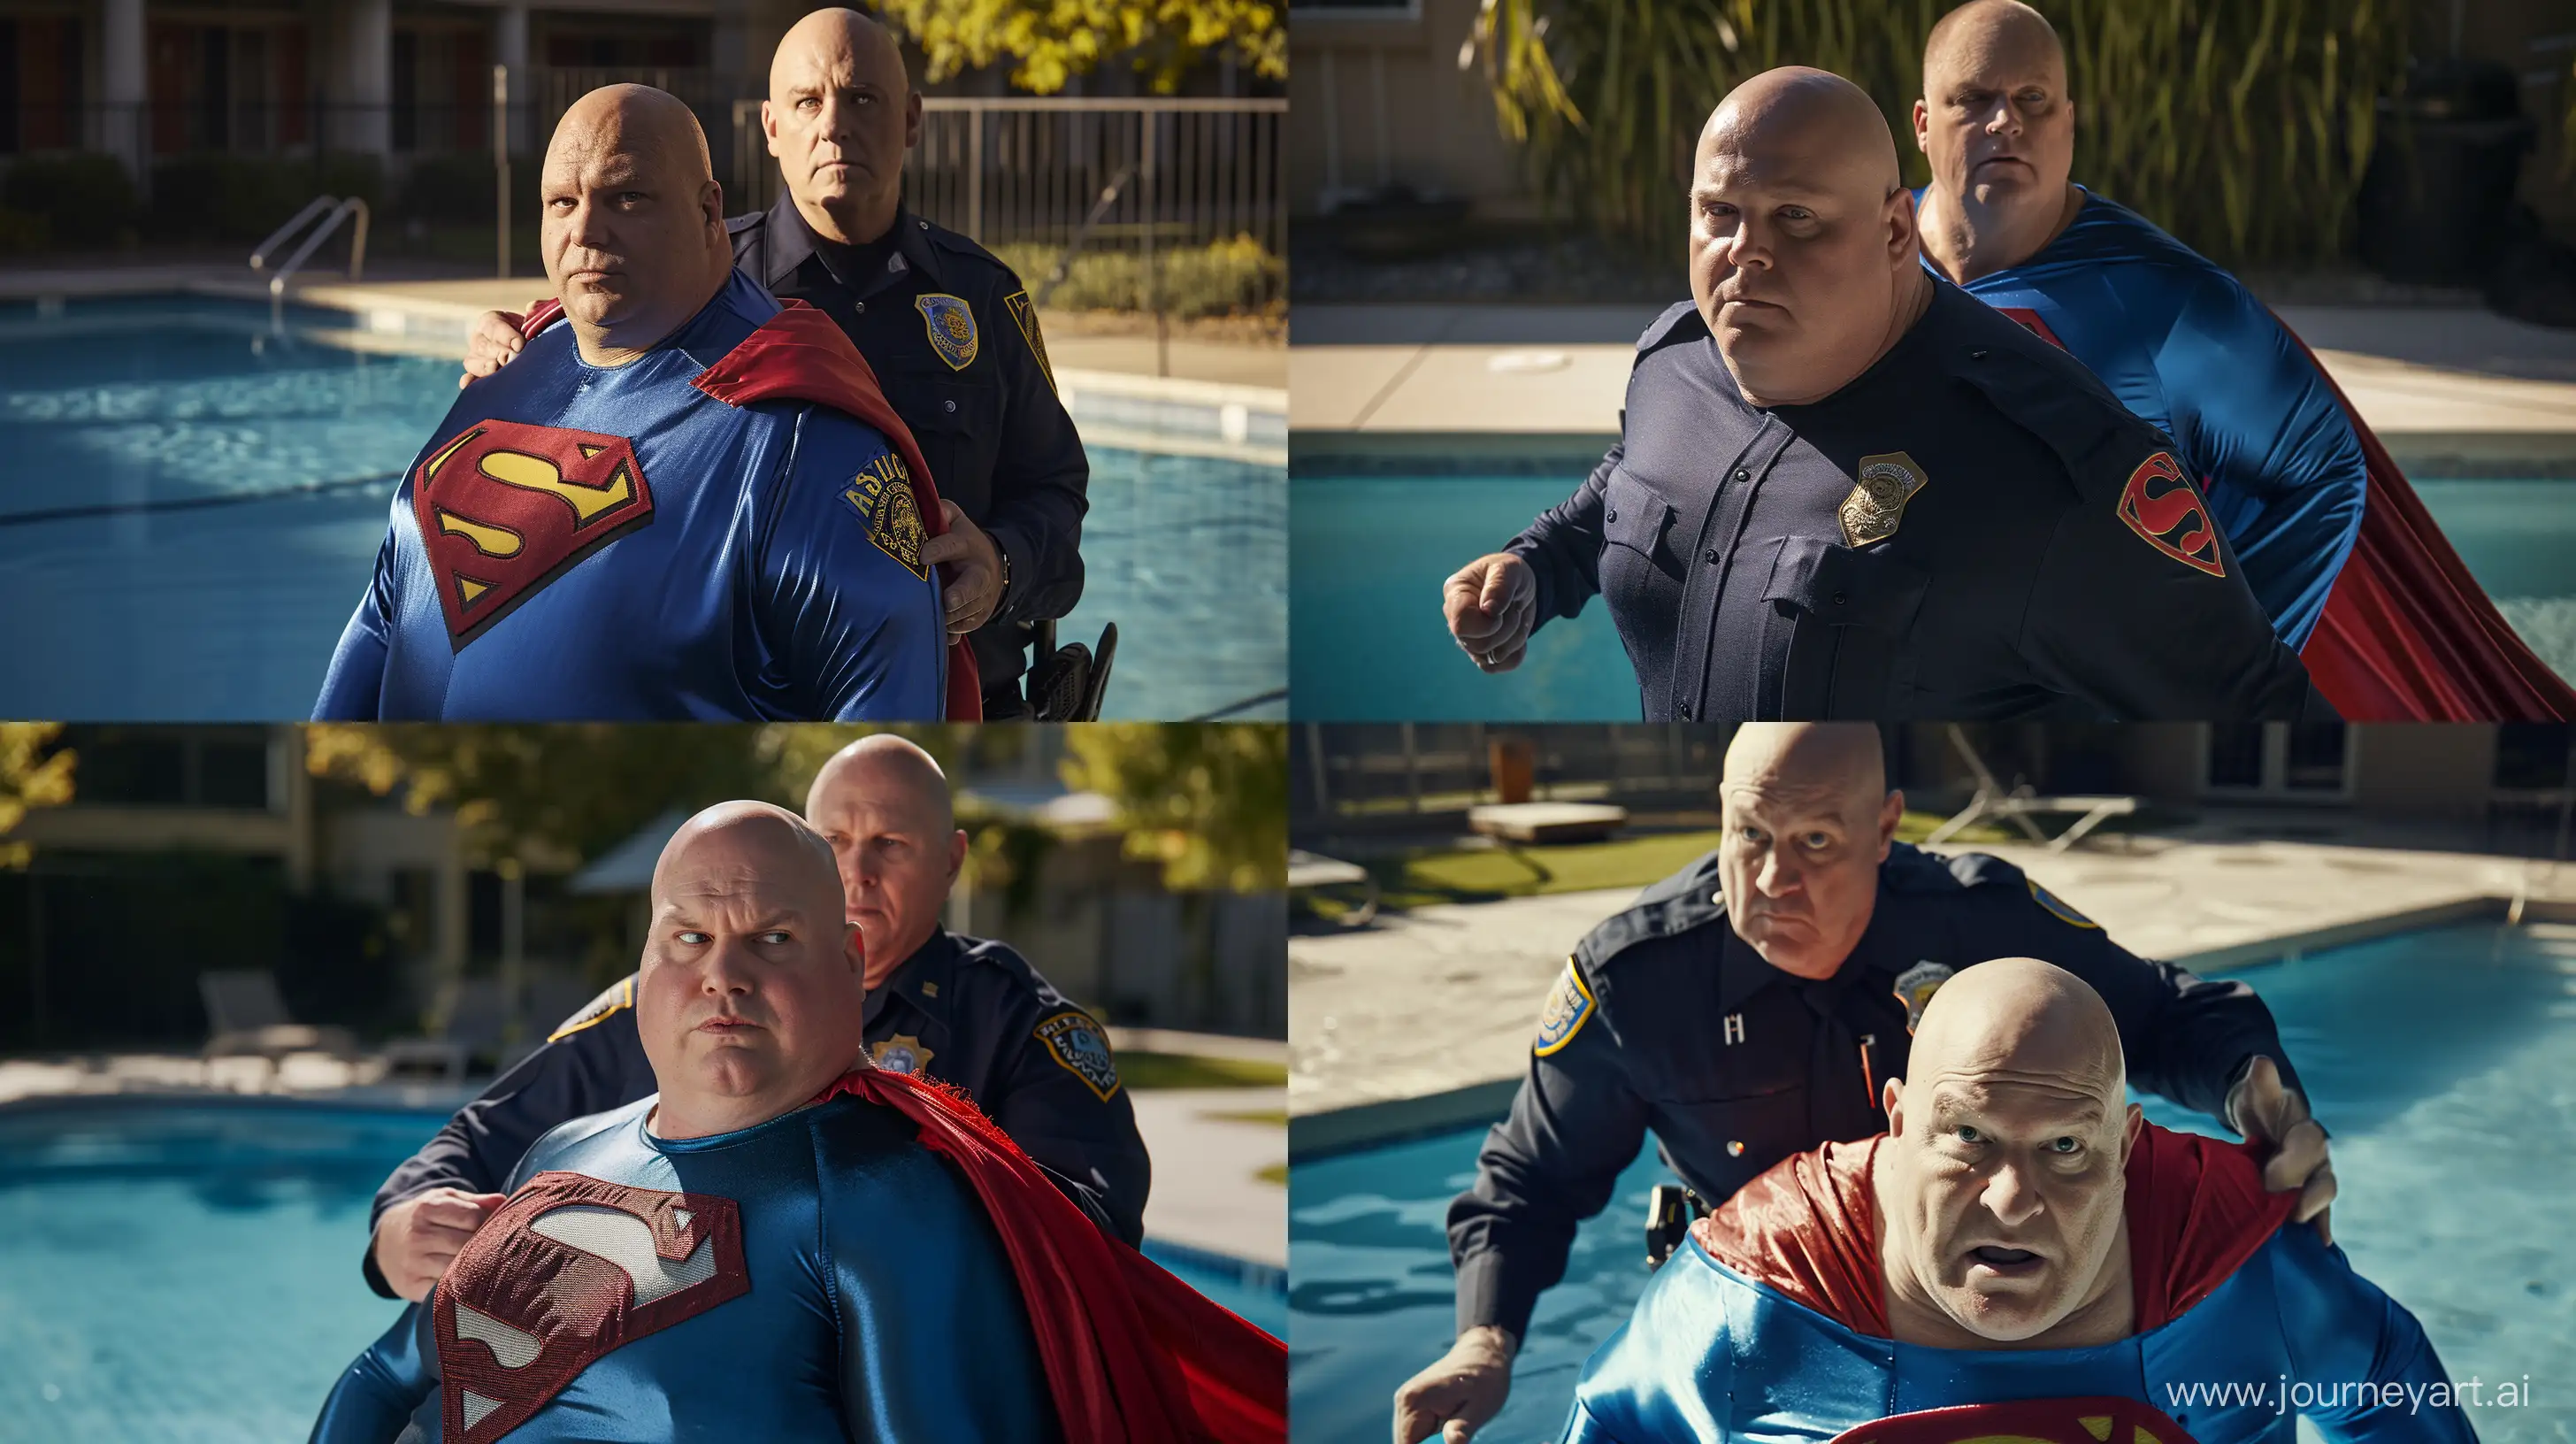 Senior-Friends-Enjoying-Playful-Poolside-Roleplay-Chubby-Policeman-and-Superman-in-Natural-Light